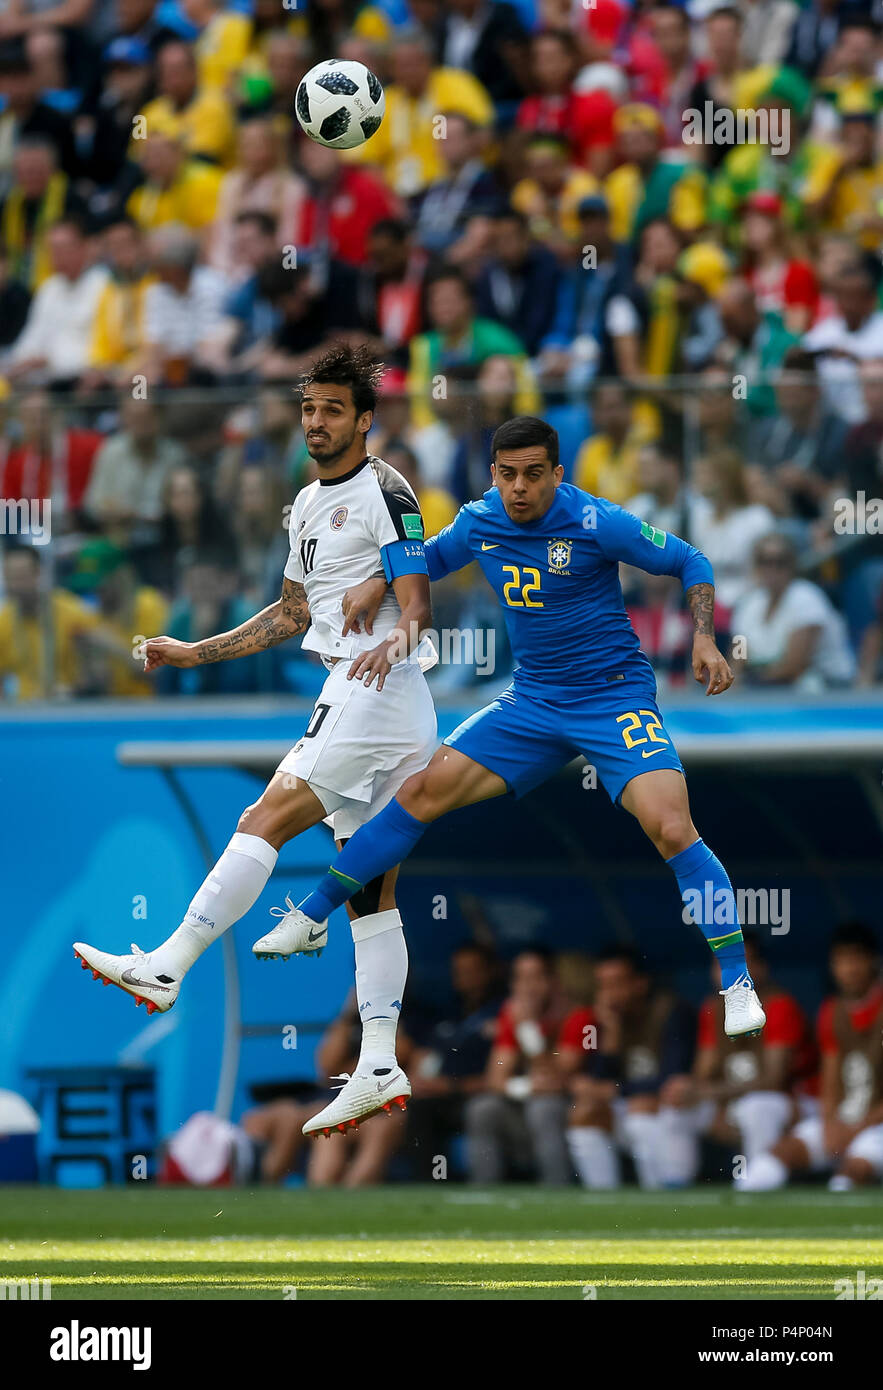 Saint Petersburg, Russia. 22nd June 2018. Bryan Ruiz of Costa Rica and Fagner of Brazil during the 2018 FIFA World Cup Group E match between Brazil and Costa Rica at Saint Petersburg Stadium on June 22nd 2018 in Saint Petersburg, Russia. (Photo by Daniel Chesterton/phcimages.com) Credit: PHC Images/Alamy Live News Stock Photo